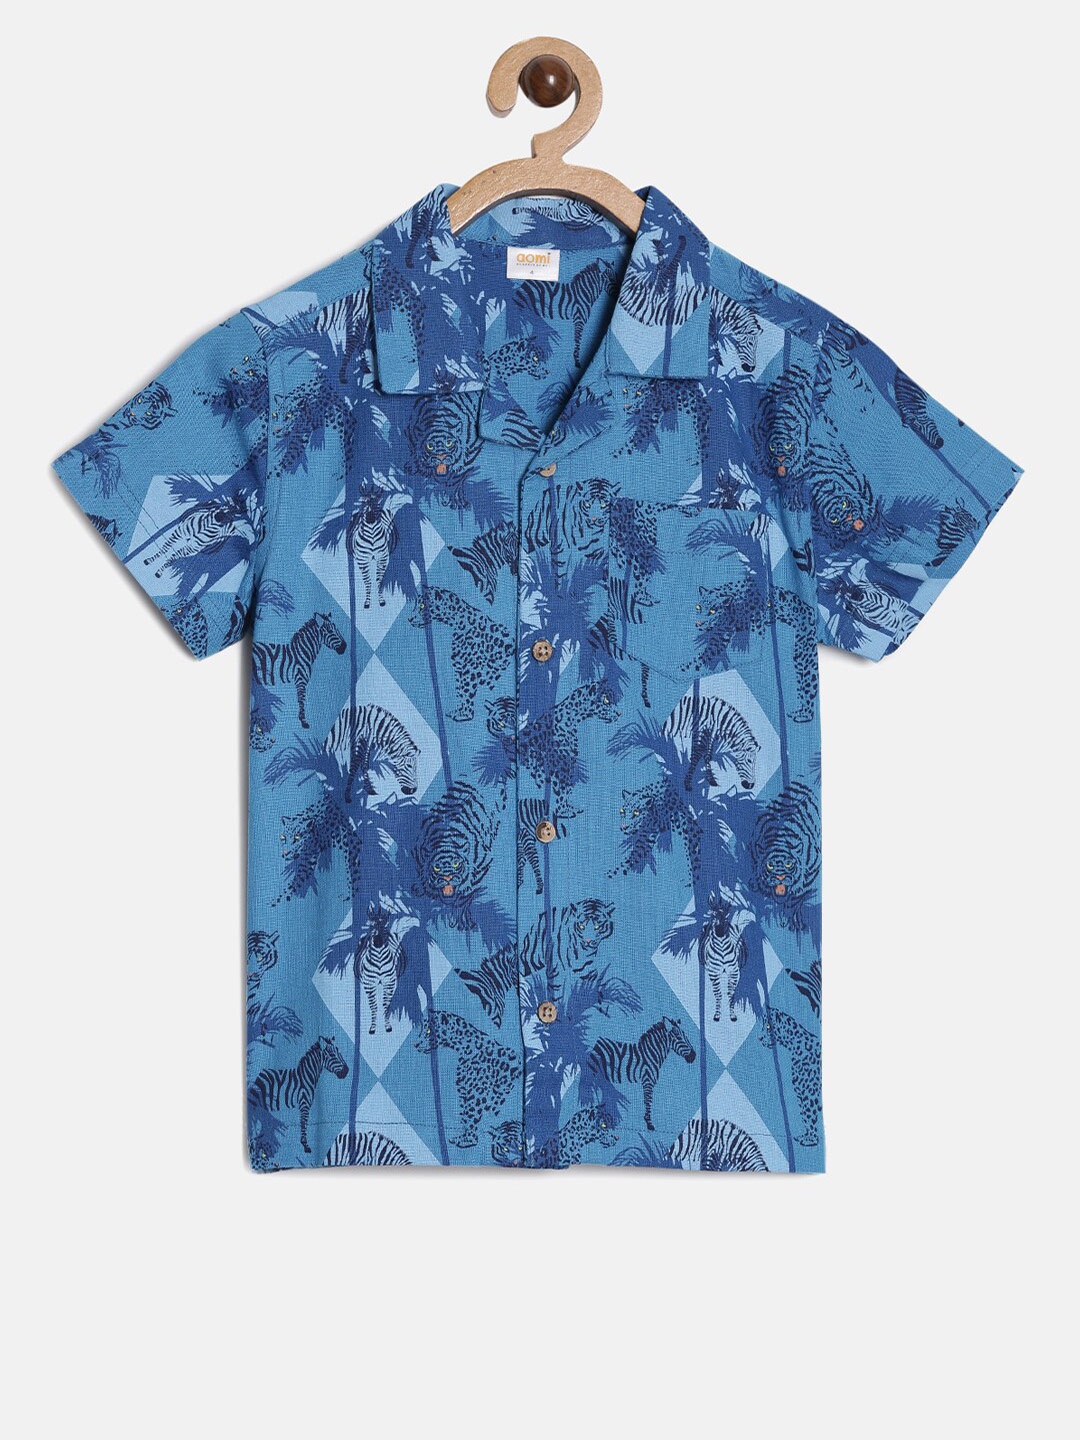 

Aomi Boys Turquoise Blue Floral Sheer Printed Casual Shirt